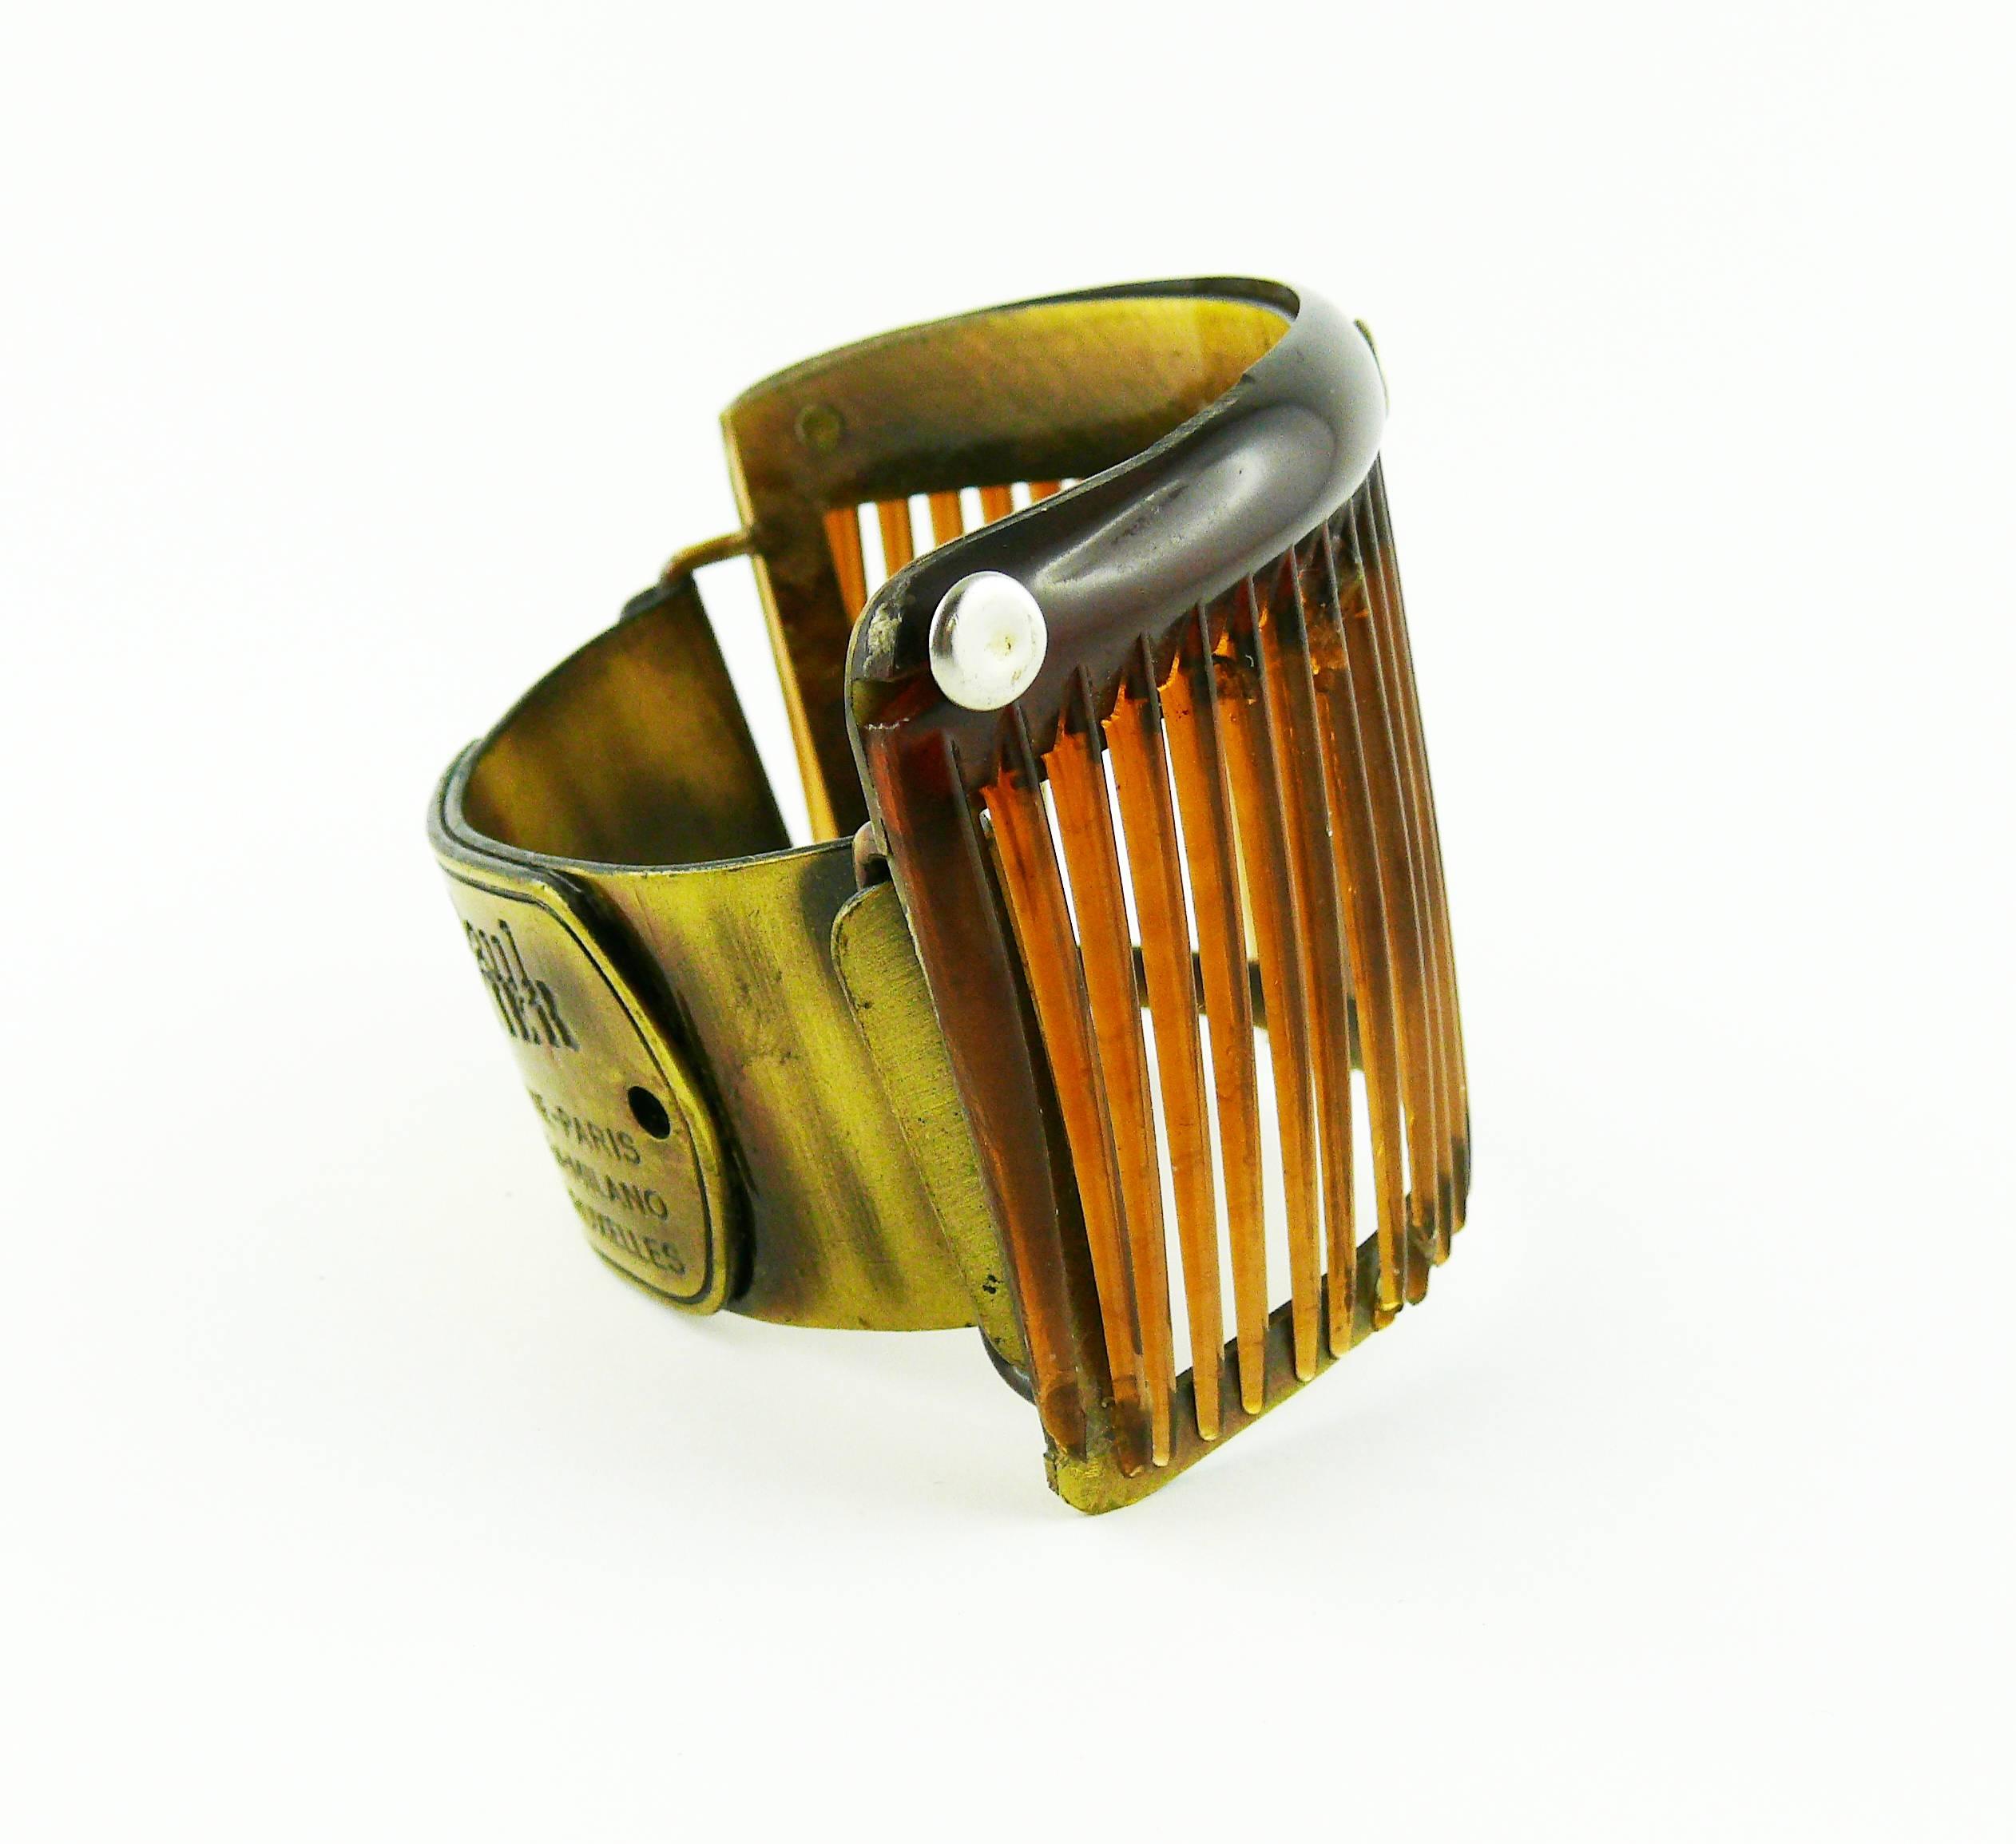 JEAN PAUL GAULTIER vintage rare cuff bracelet featuring a comb "cage" design.

Embossed JEAN PAUL GAULTIER.

Indicative measurements : inside circumference approx. 17.28 cm (6.80 inches) / width approx. 5.7 cm (2.24 inches).

JEWELRY